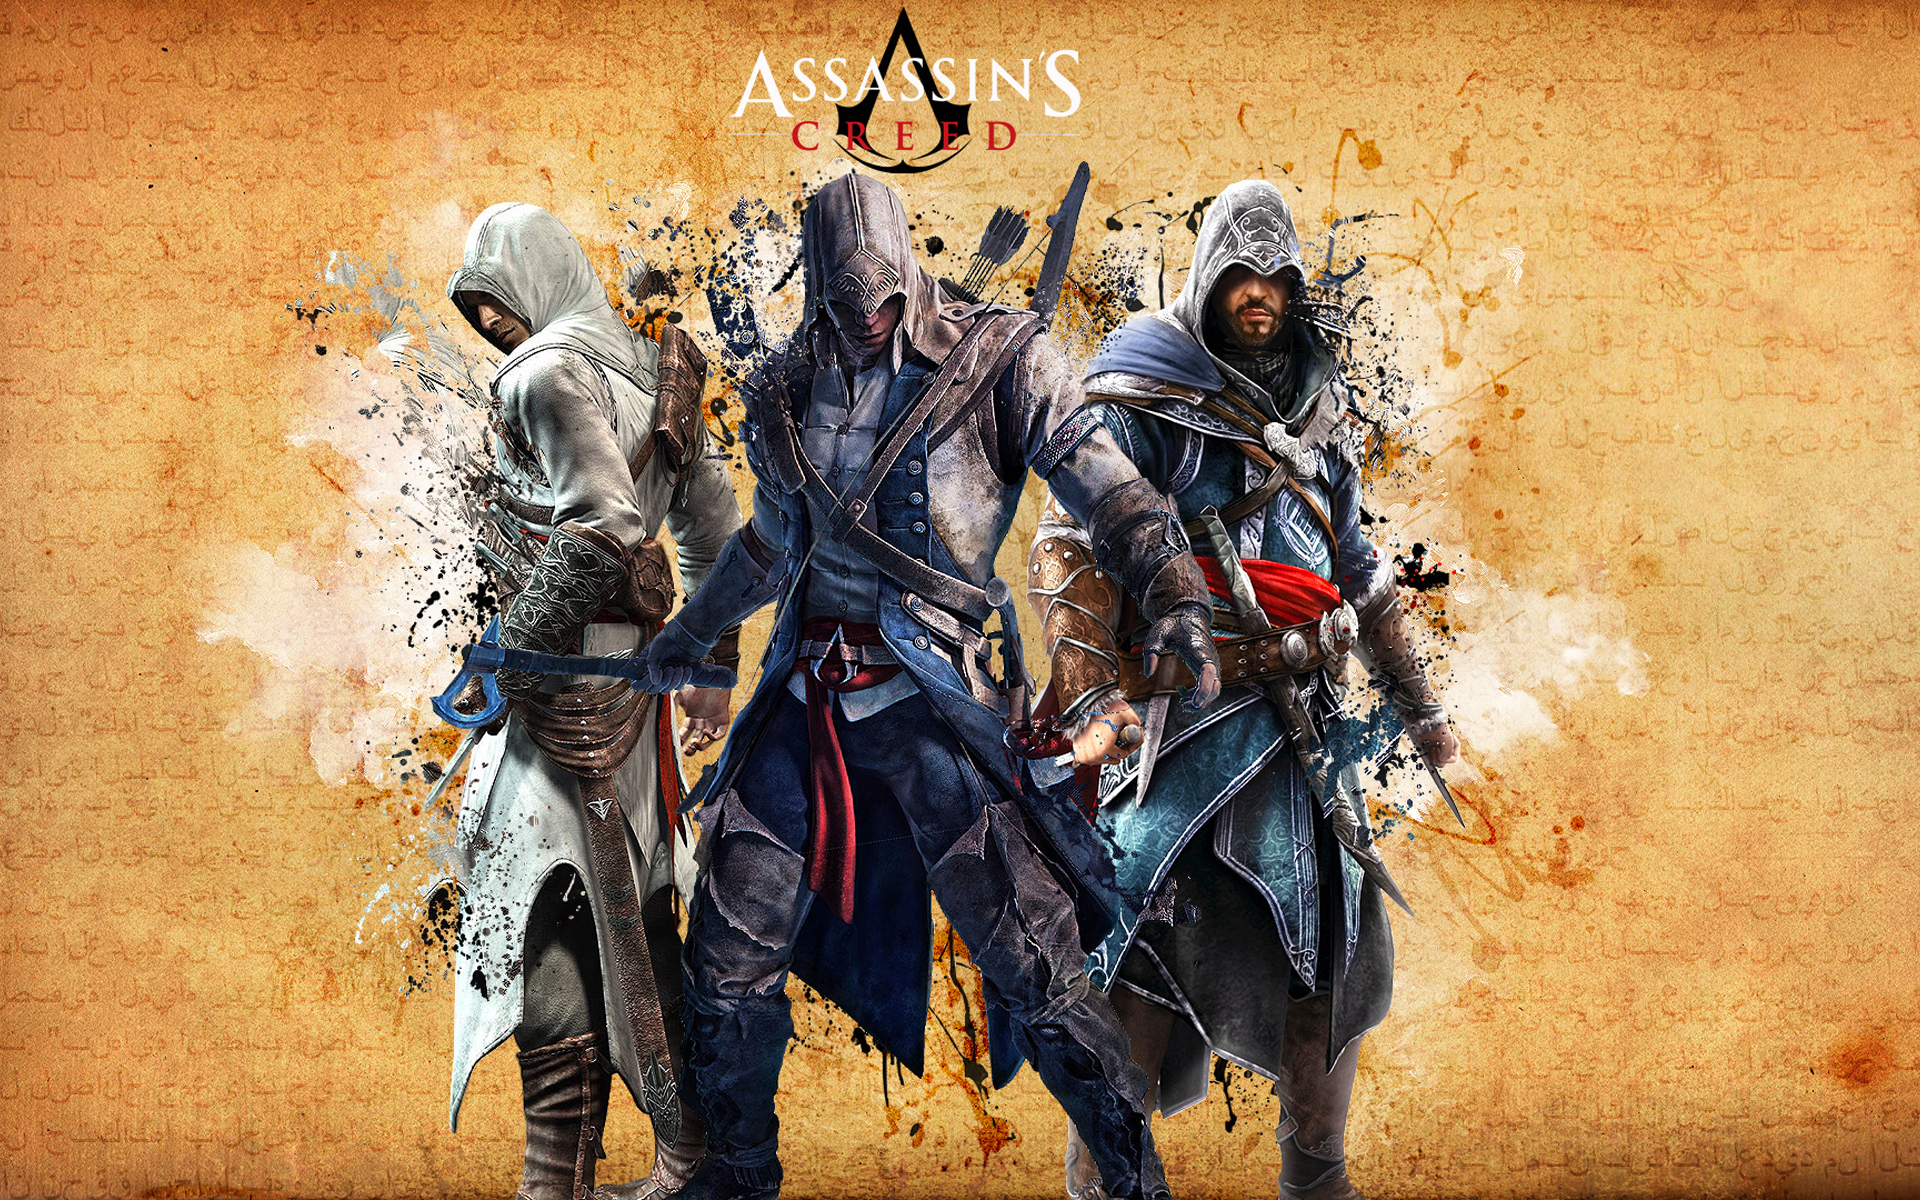 connor (assassin's creed), assassin's creed, video game, altair (assassin's creed), ezio (assassin's creed)